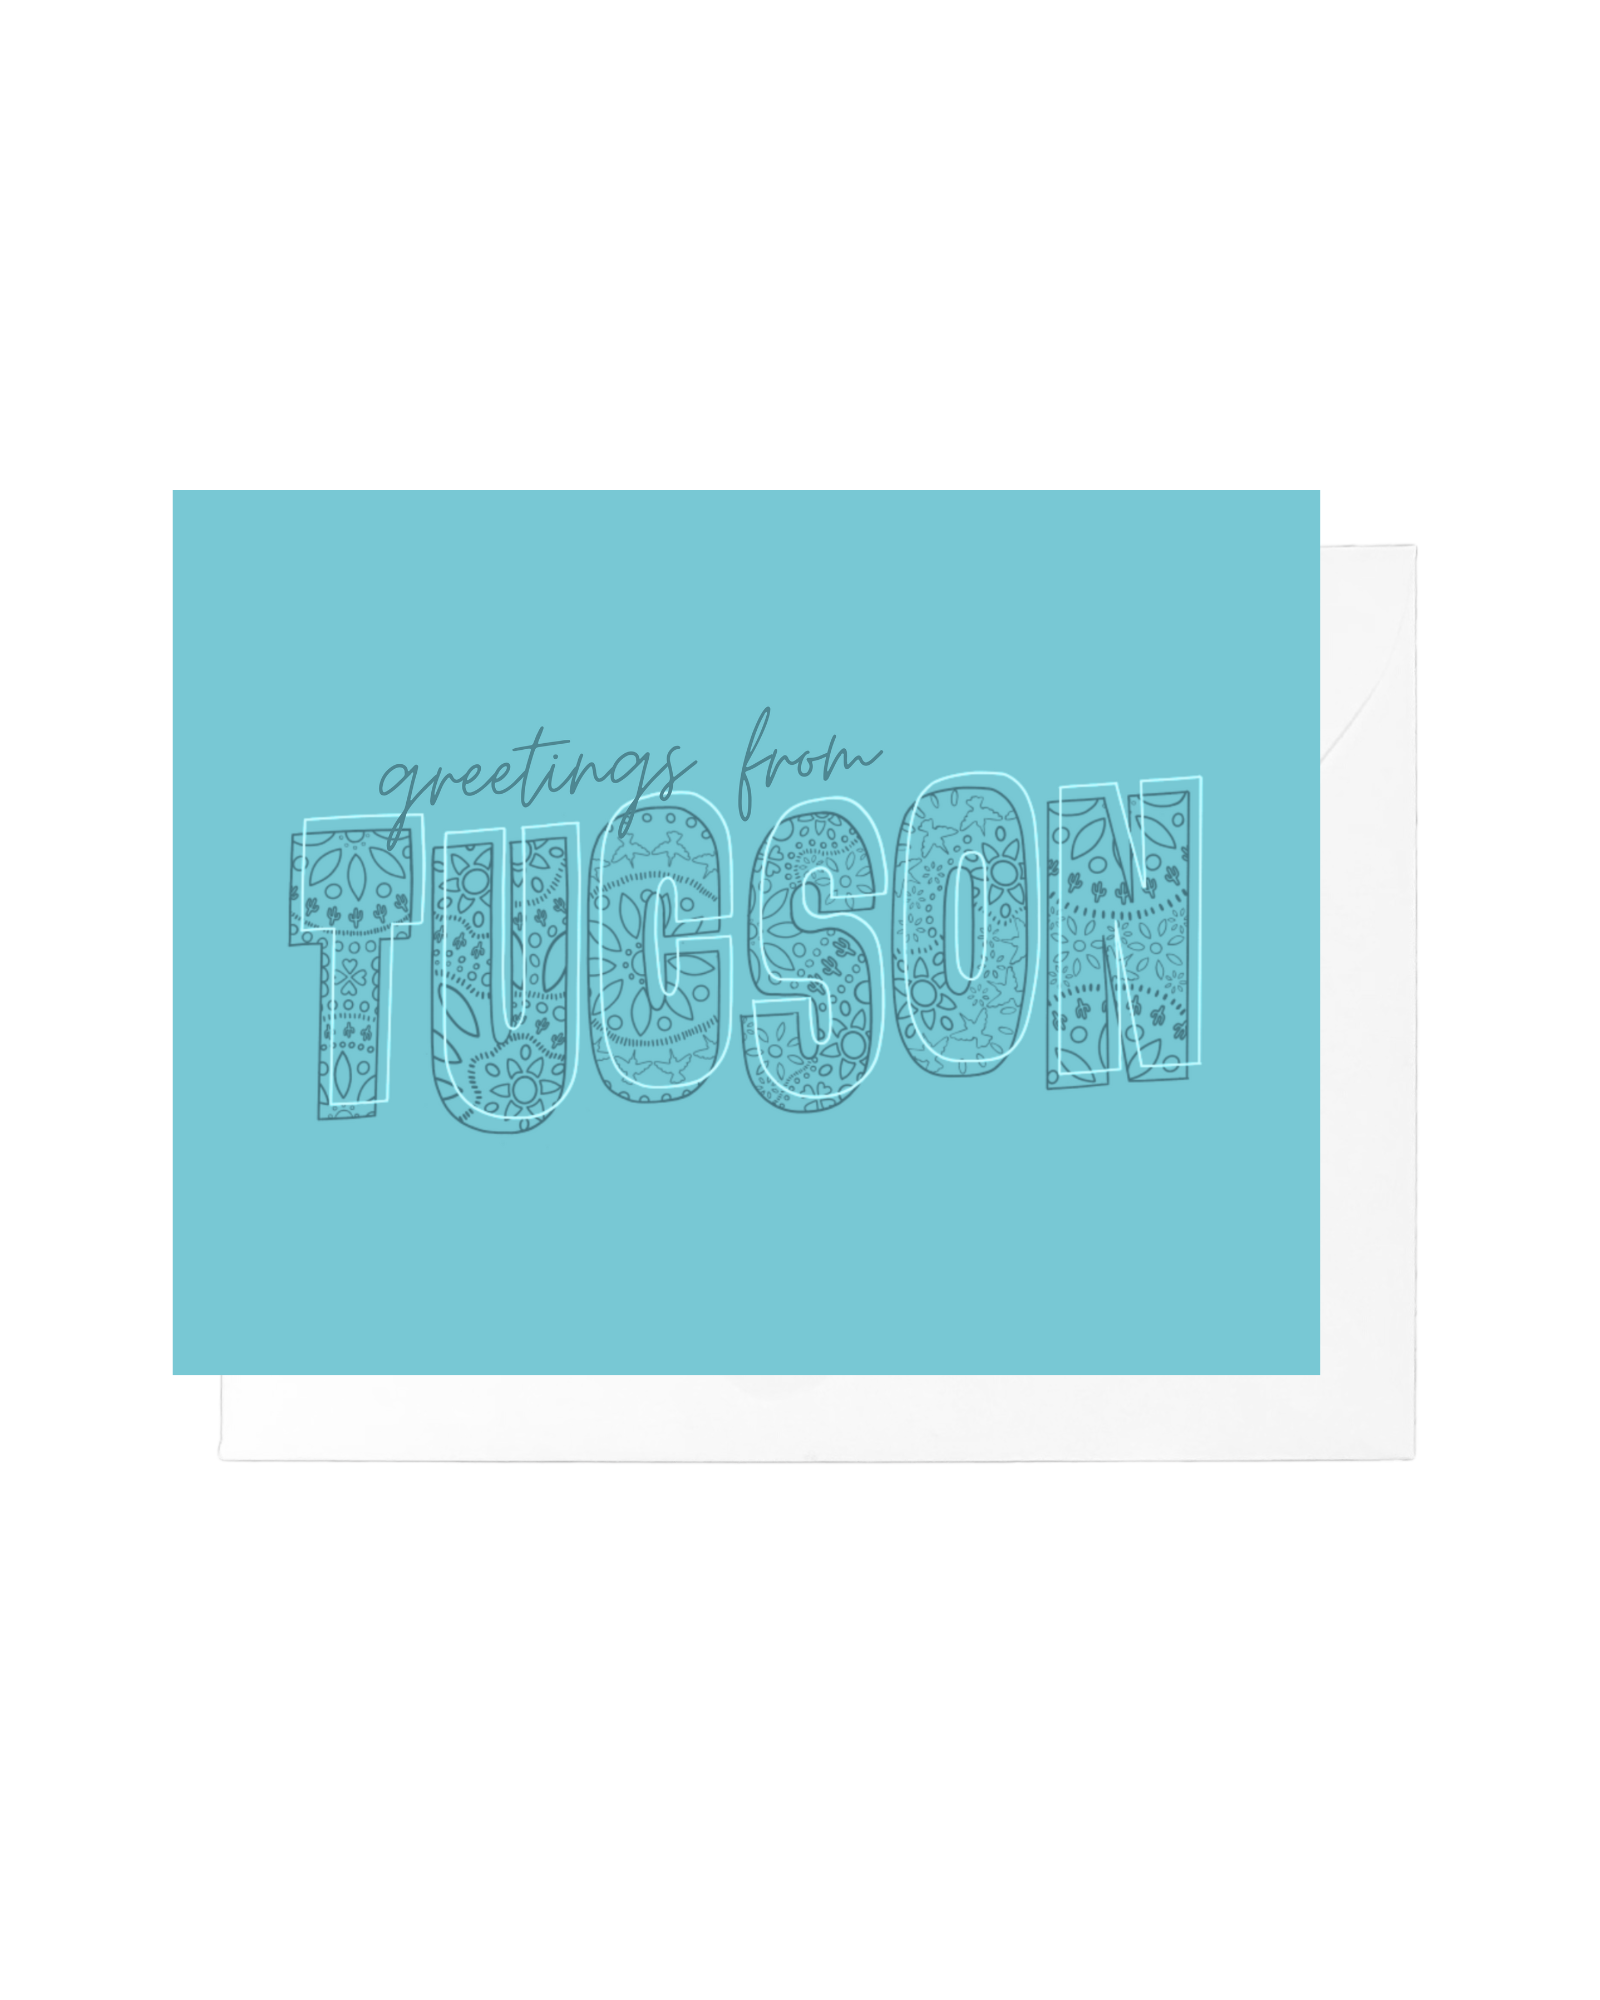 Greetings from Tucson Papel Picado Greeting Card